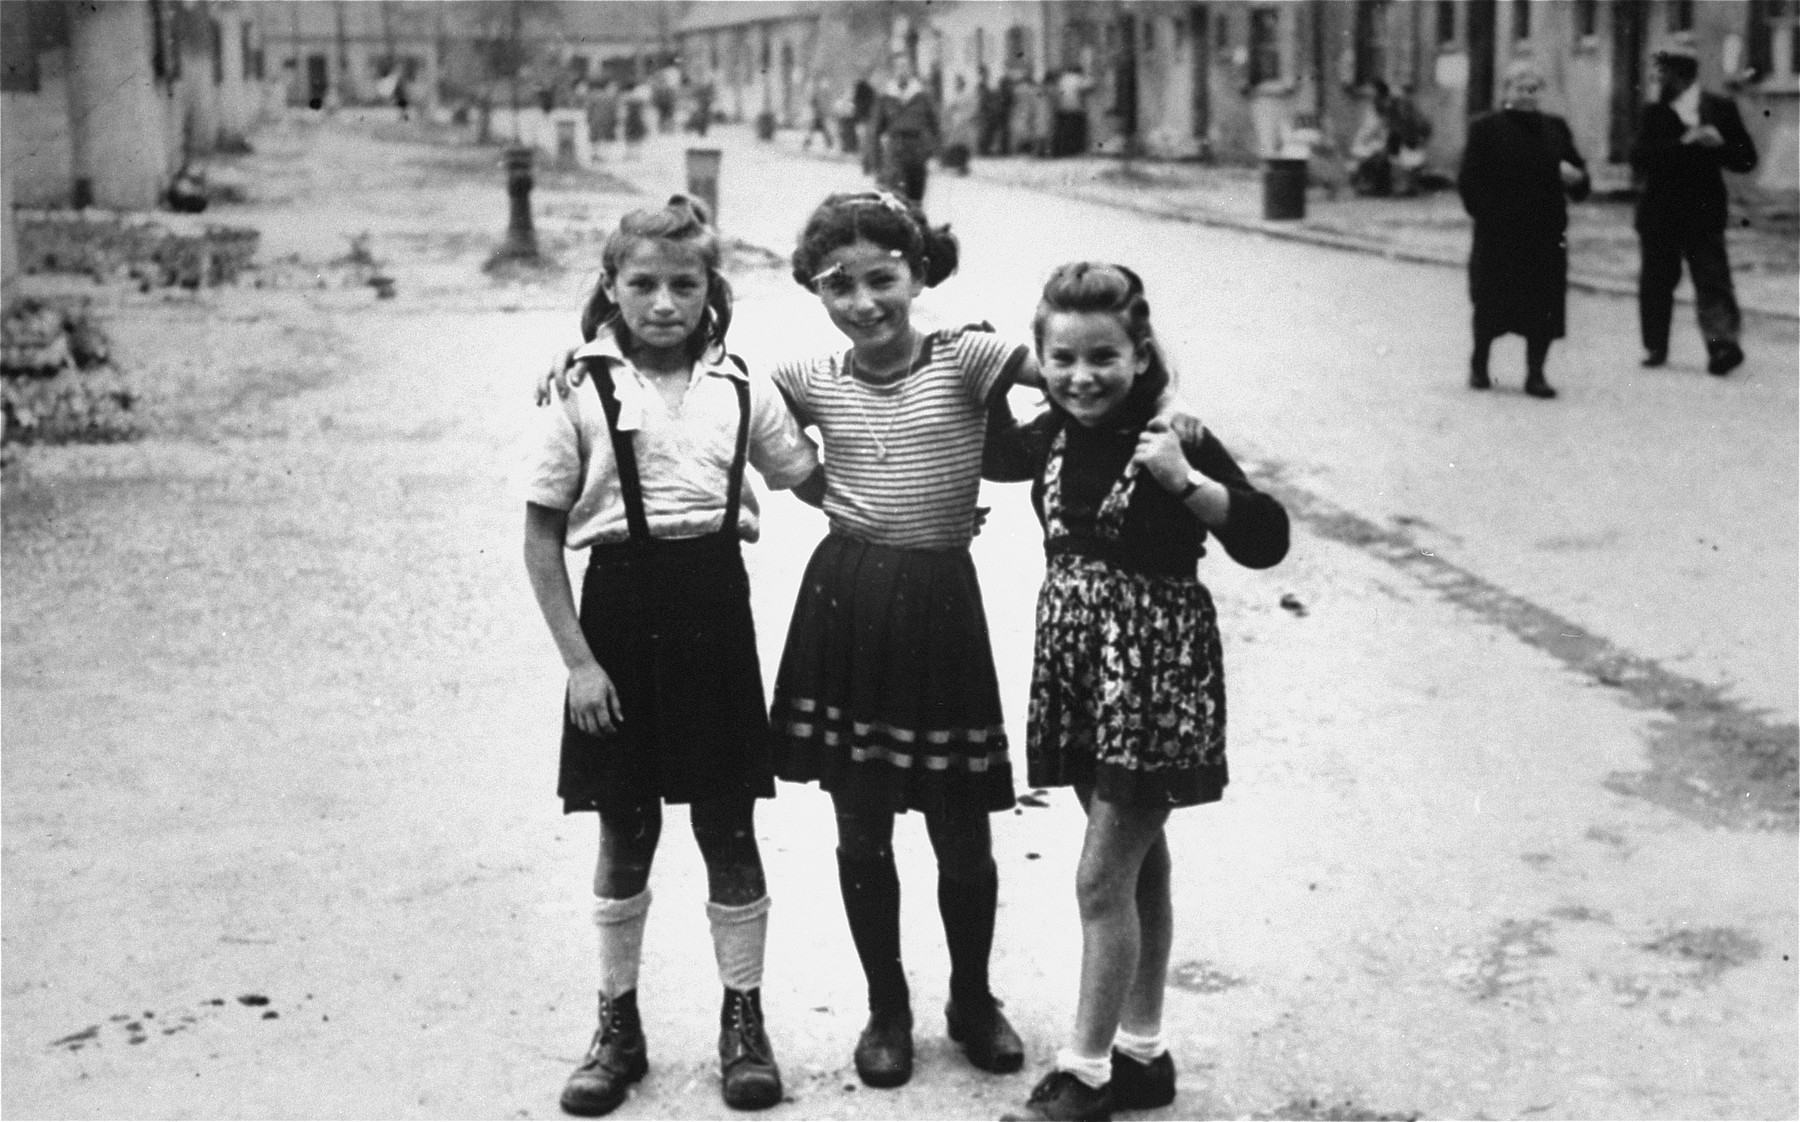 Three young girls pose together on a street of the  Foehrenwald displaced persons camp.  

Pictured from left to right are Pesa Balter, Chaia Libstug and Pela Roset.